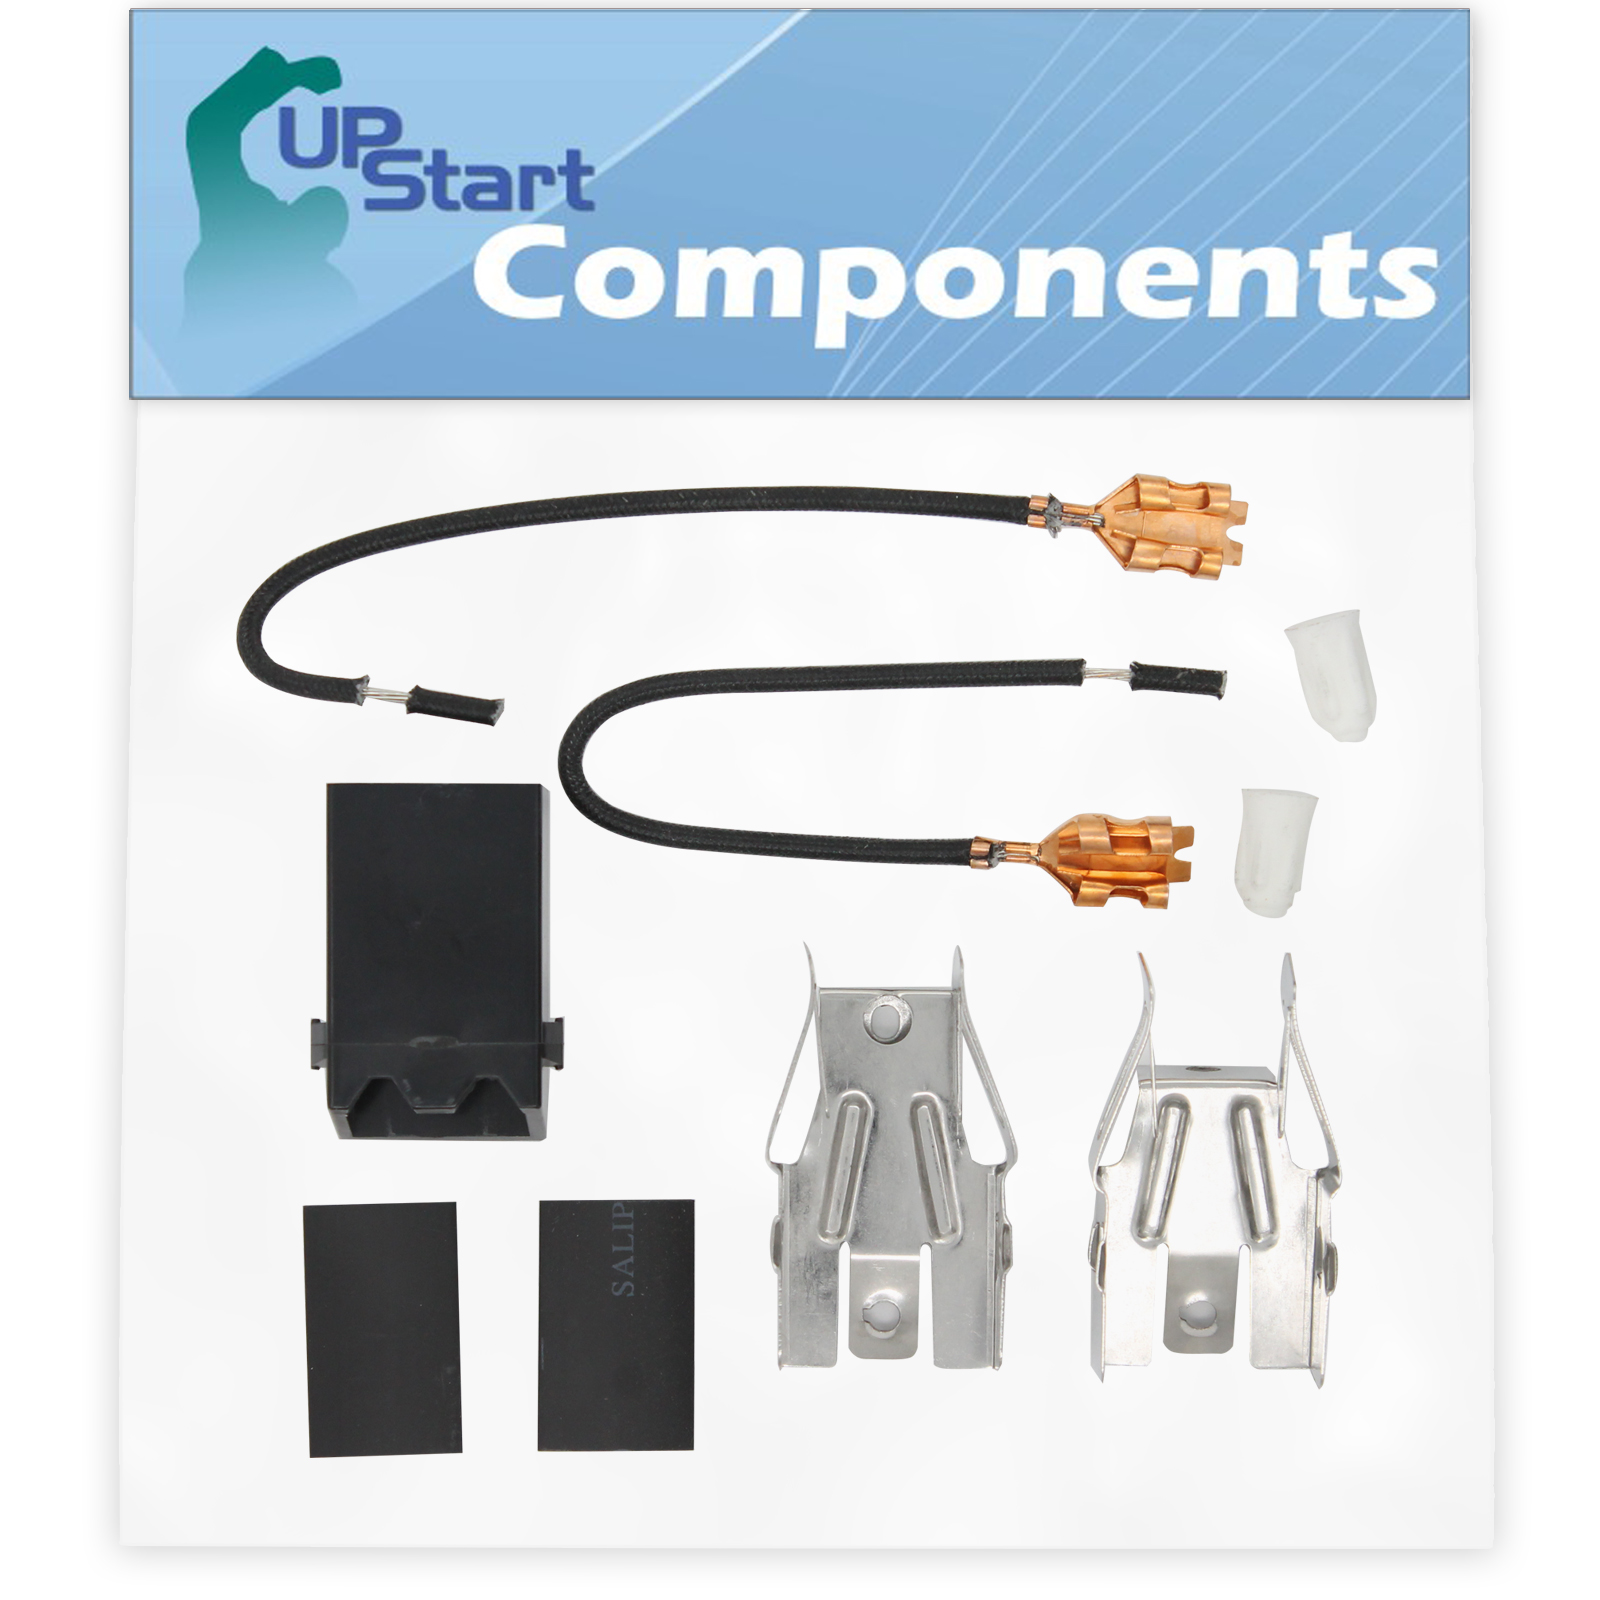 330031 Top Burner Receptacle Kit Replacement for Amana 1870.000 Range/Cooktop/Oven - Compatible with 330031 Range Burner Receptacle Kit - UpStart Components Brand - image 1 of 4